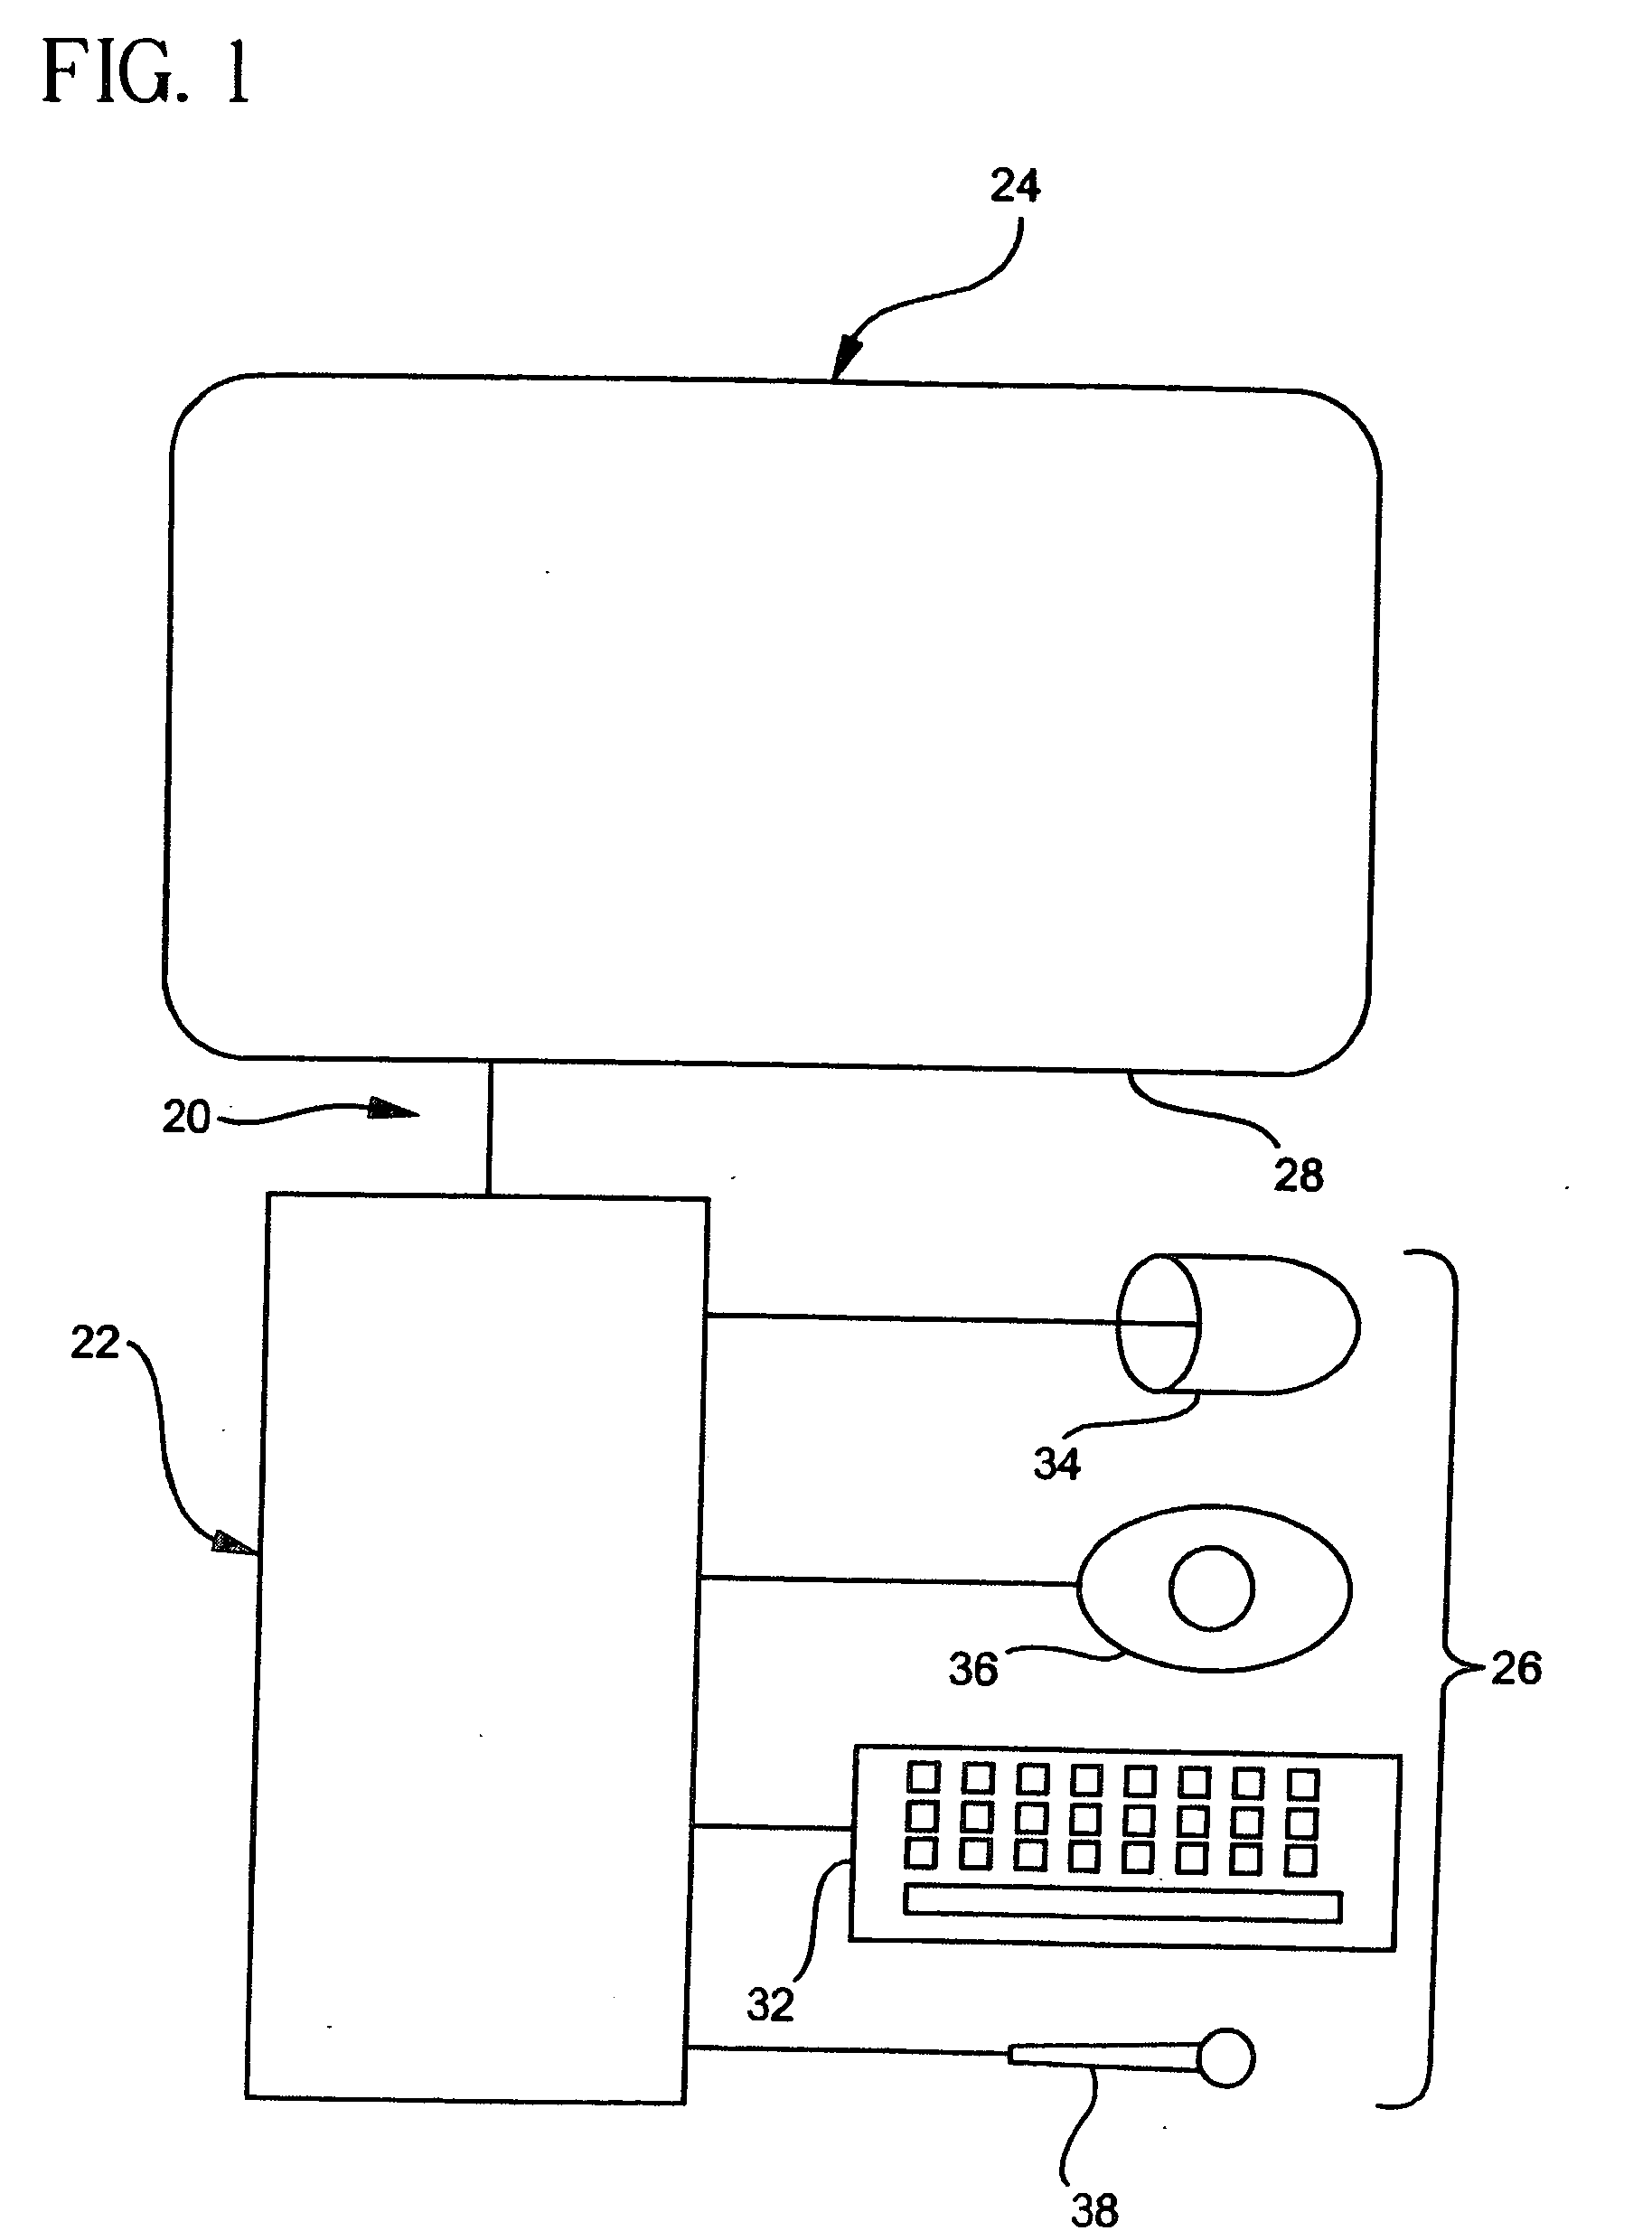 User interface for remote control of medical devices